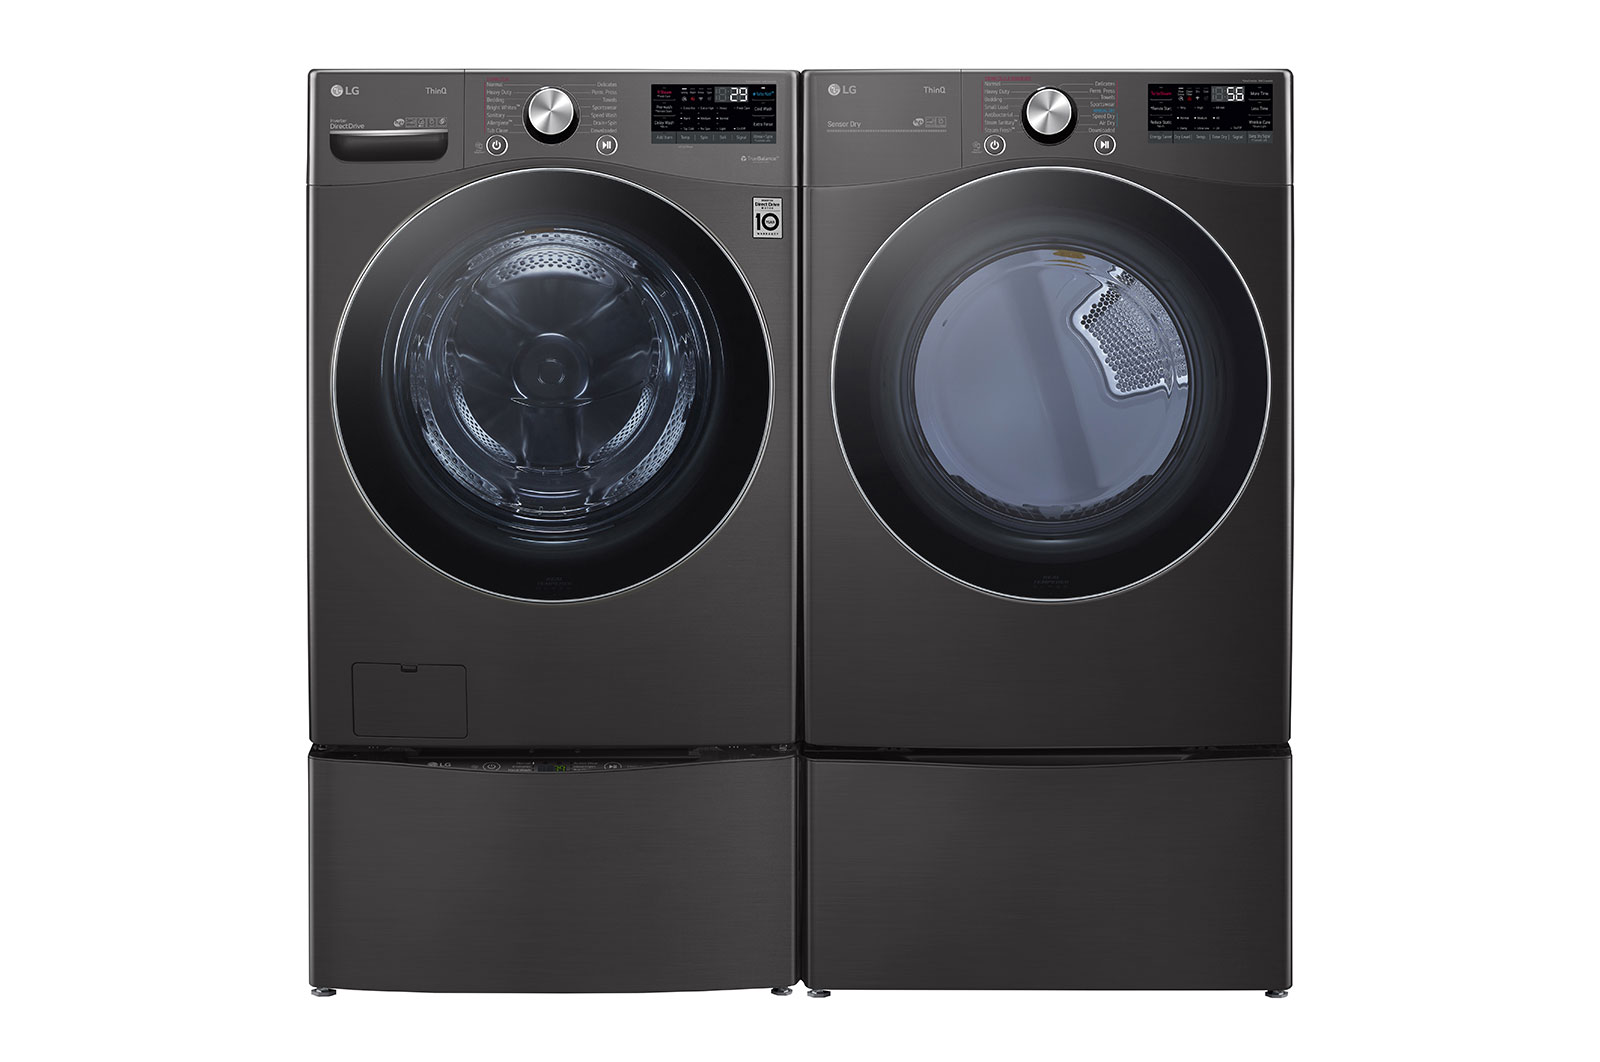 LG 5.0 cu. ft. Mega Capacity Smart wifi Enabled Front Load Washer with